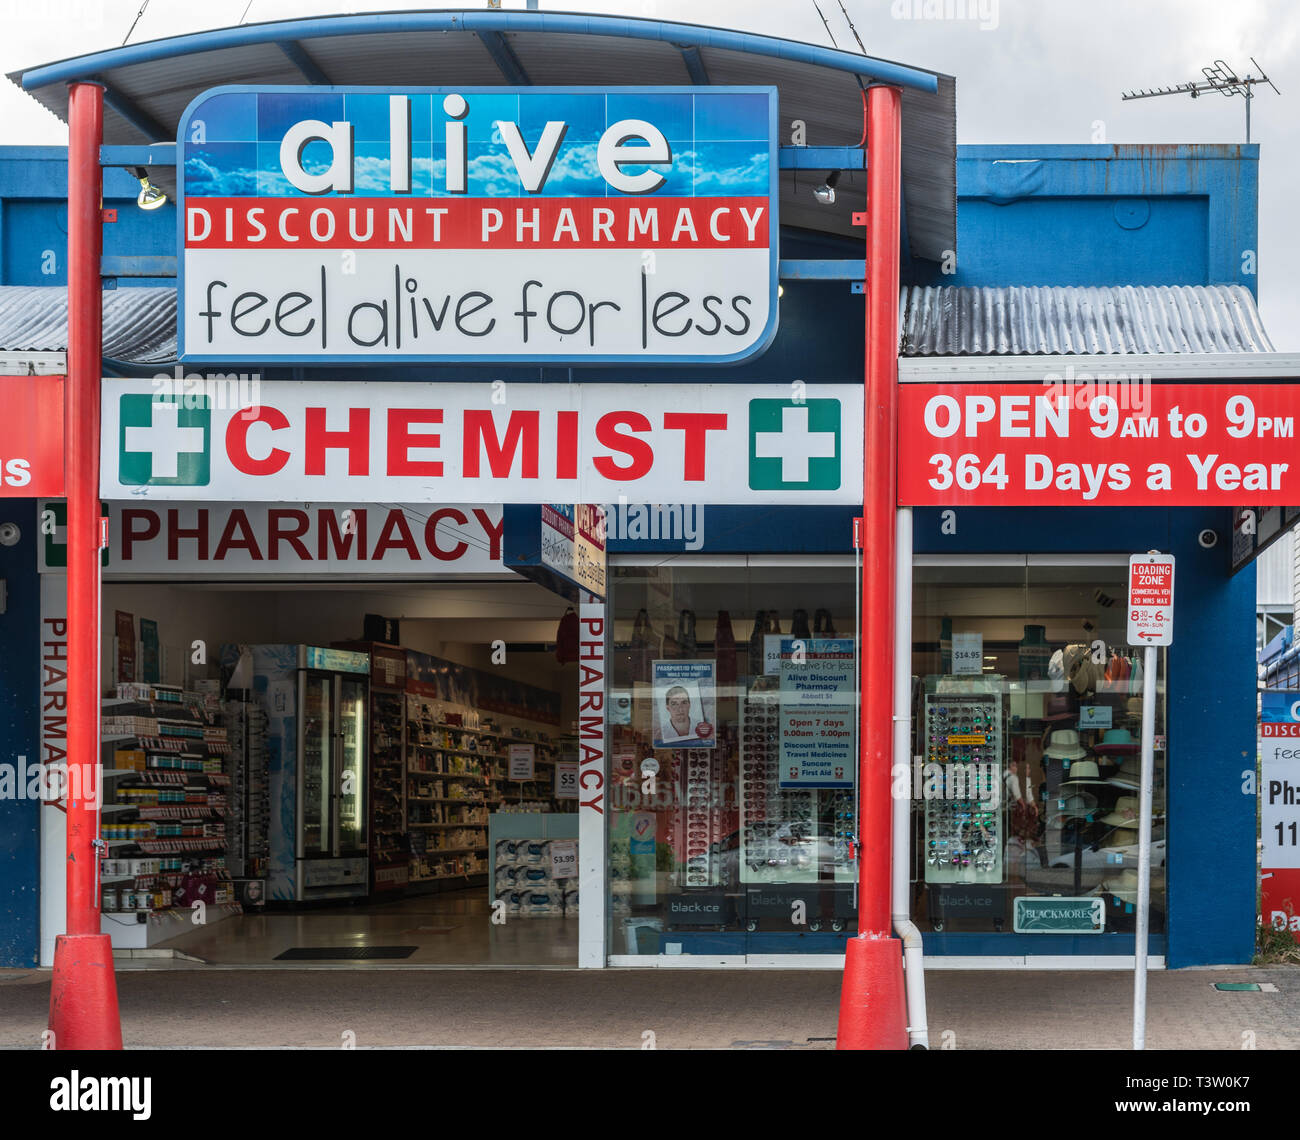 Cairns, Australia - February 17, 2019: Pharmacy and Chemist business in Abbott Street features blue and red advertisements. Open doors and gray skies. Stock Photo